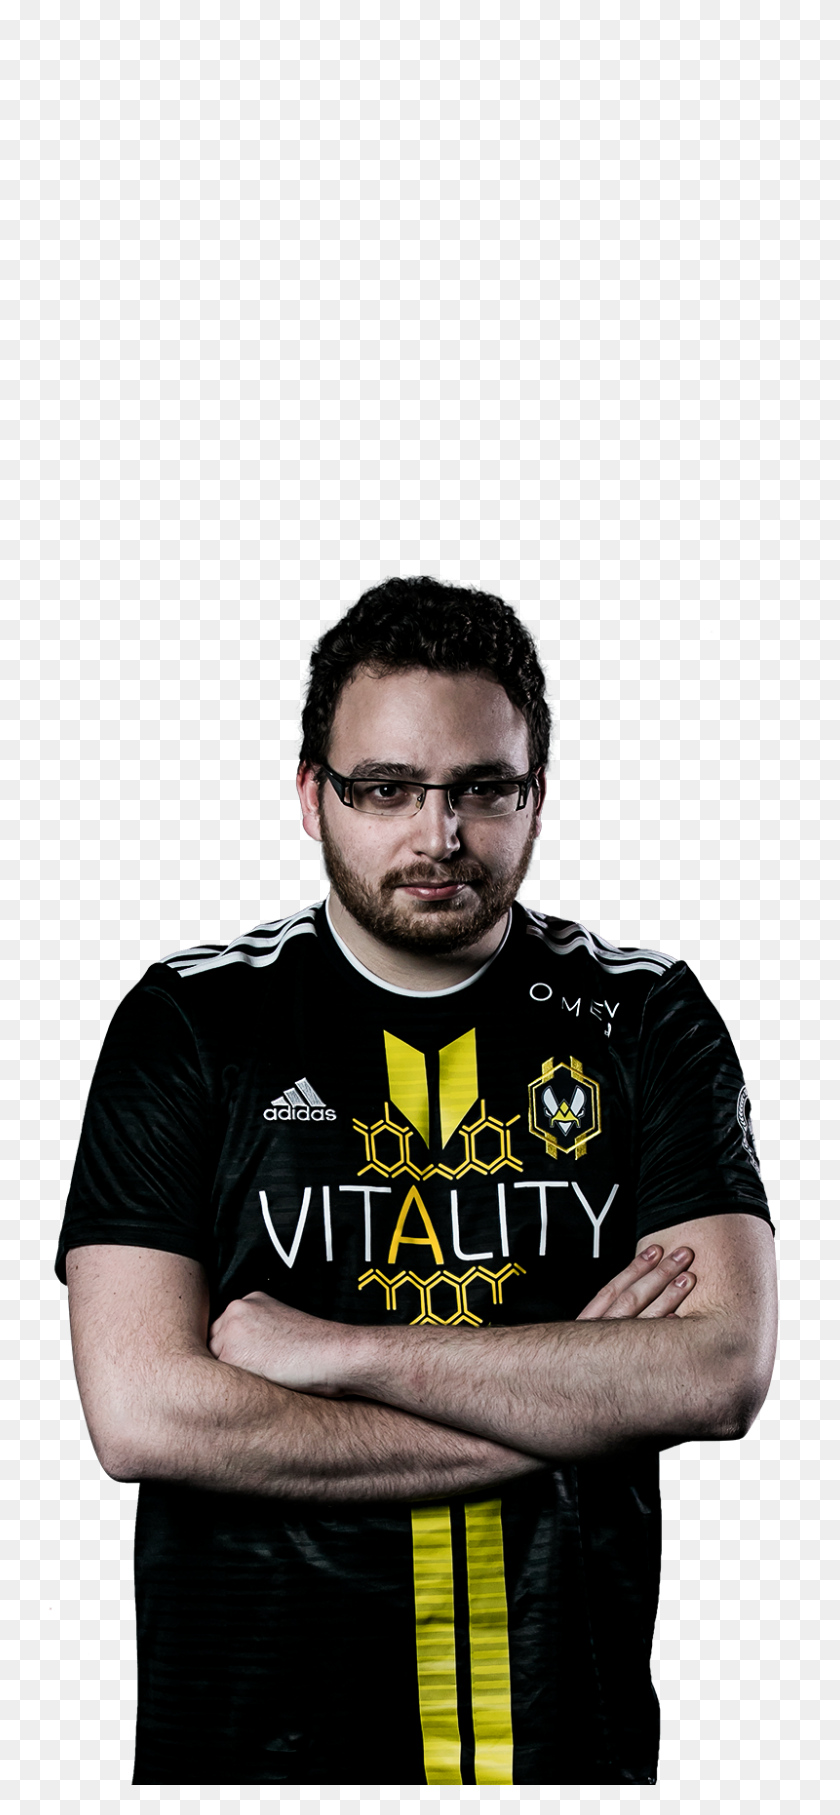 800x1800 Equipo Vitality - Street Fighter Png